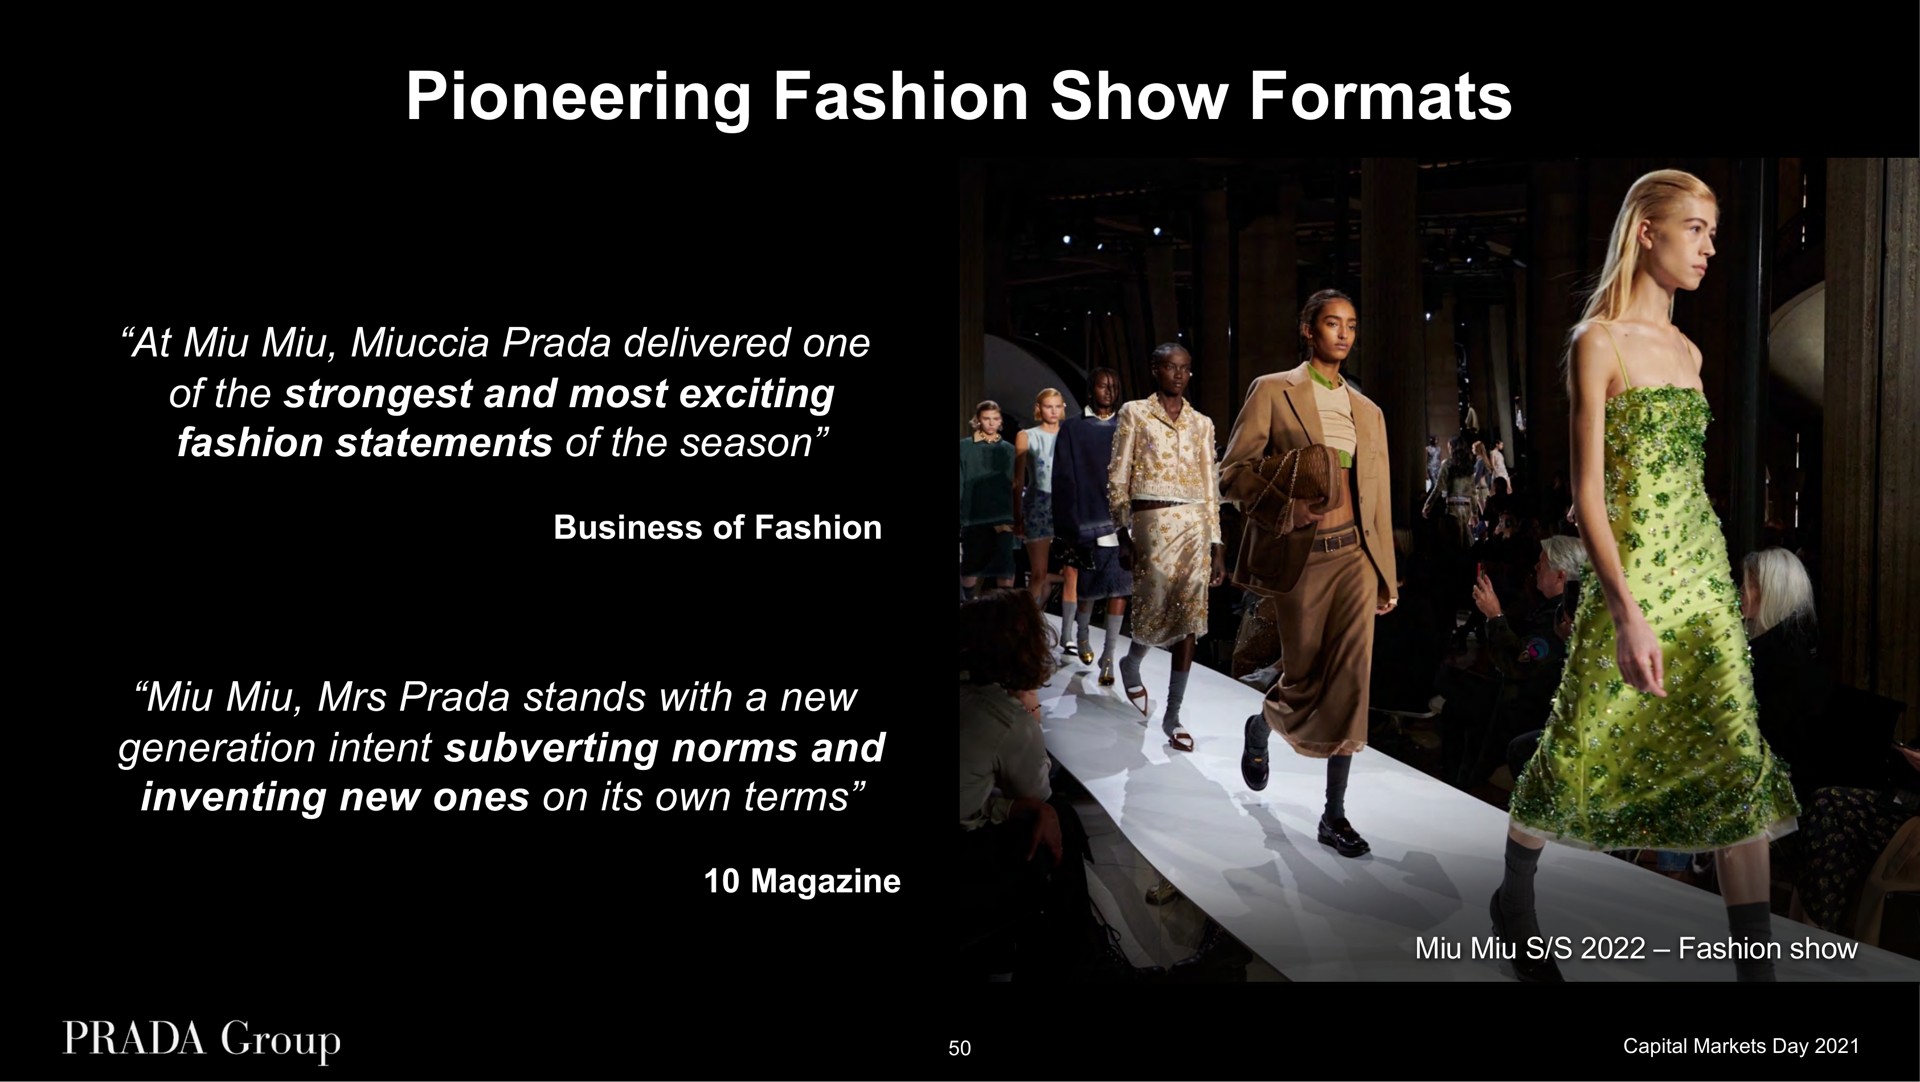 pioneering fashion show formats at delivered one of the and most exciting fashion statements of the season business of fashion stands with a new generation intent subverting norms and inventing new ones on its own terms magazine fashion show | Prada